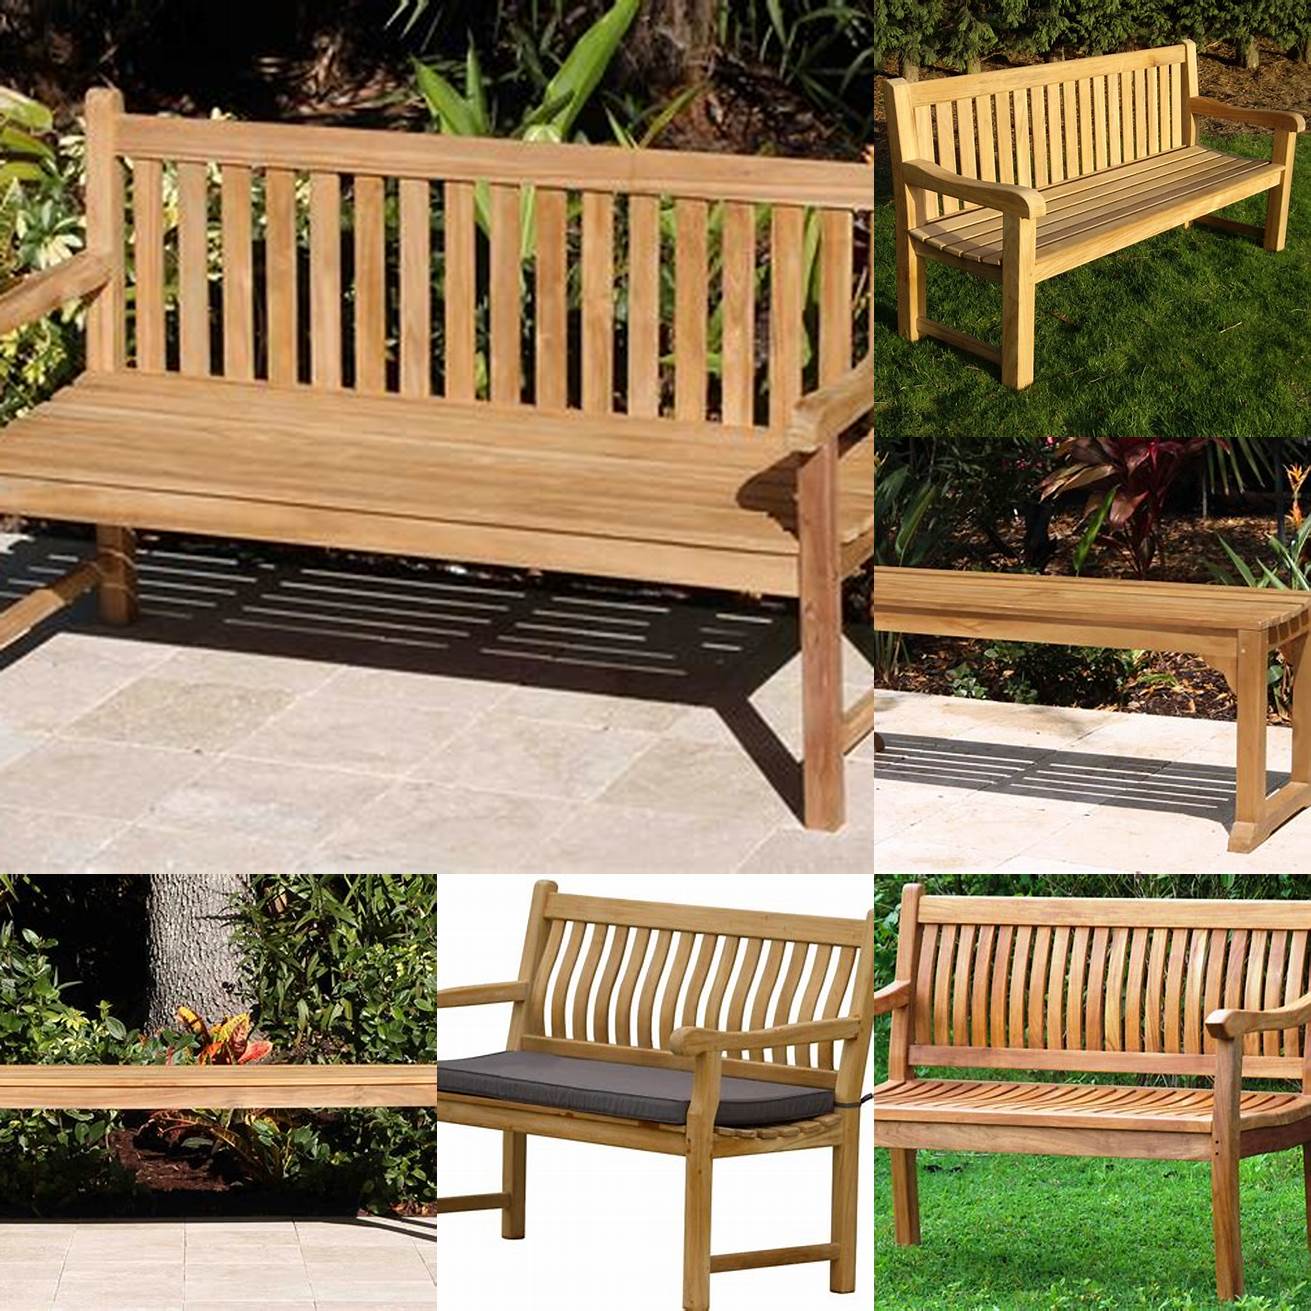 Synthetic teak benches